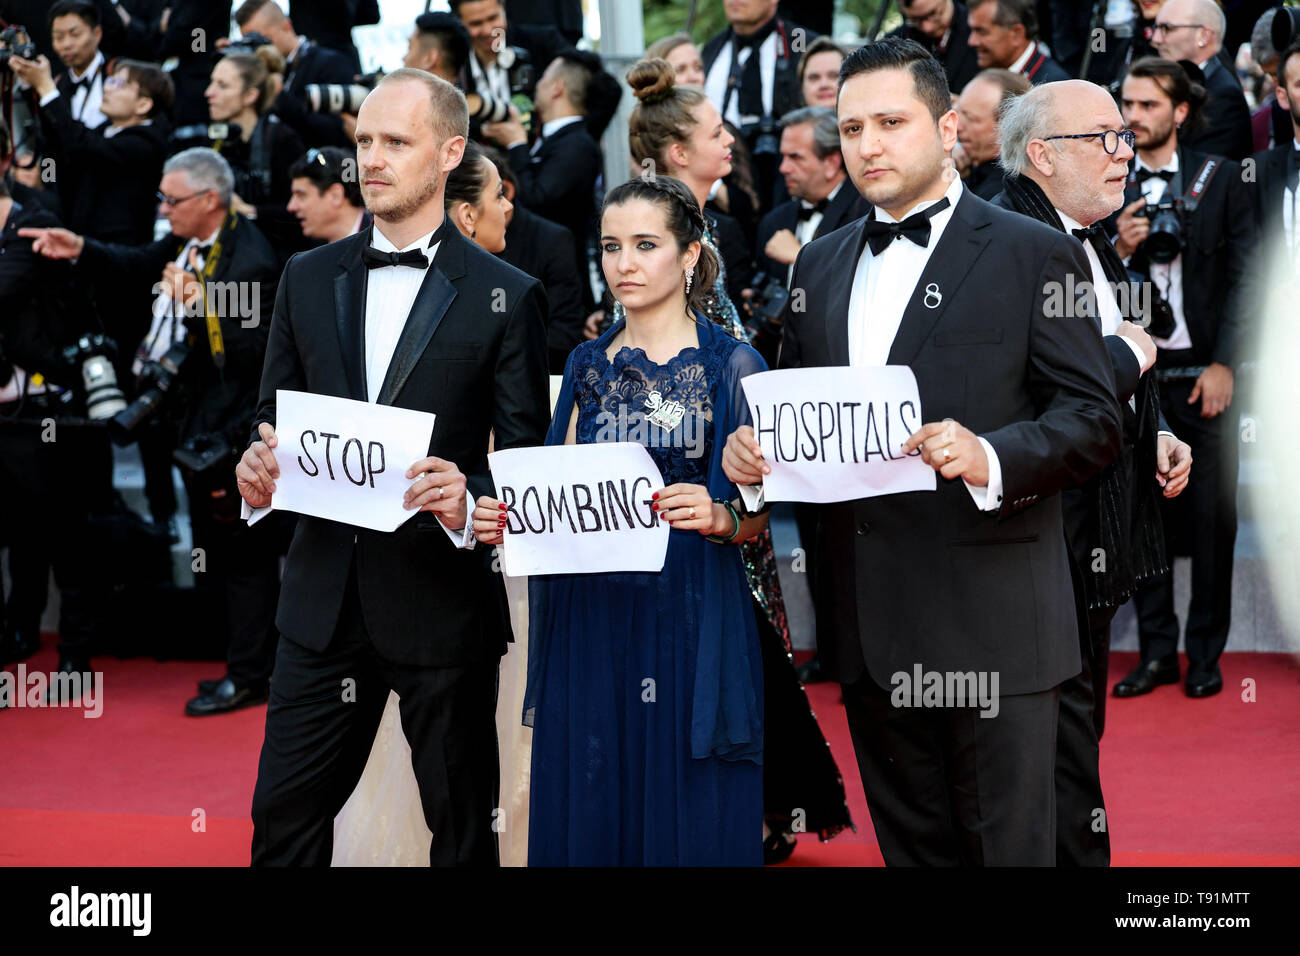 Cannes. 15th May, 2019. Guests arrives to the premiere of " LES MISÉRABLES " during the 2019 Cannes Film Festival on May 15, 2019 at Palais des Festivals in Cannes, France. ( Credit: Lyvans Boolaky/Image Space/Media Punch)/Alamy Live News Stock Photo